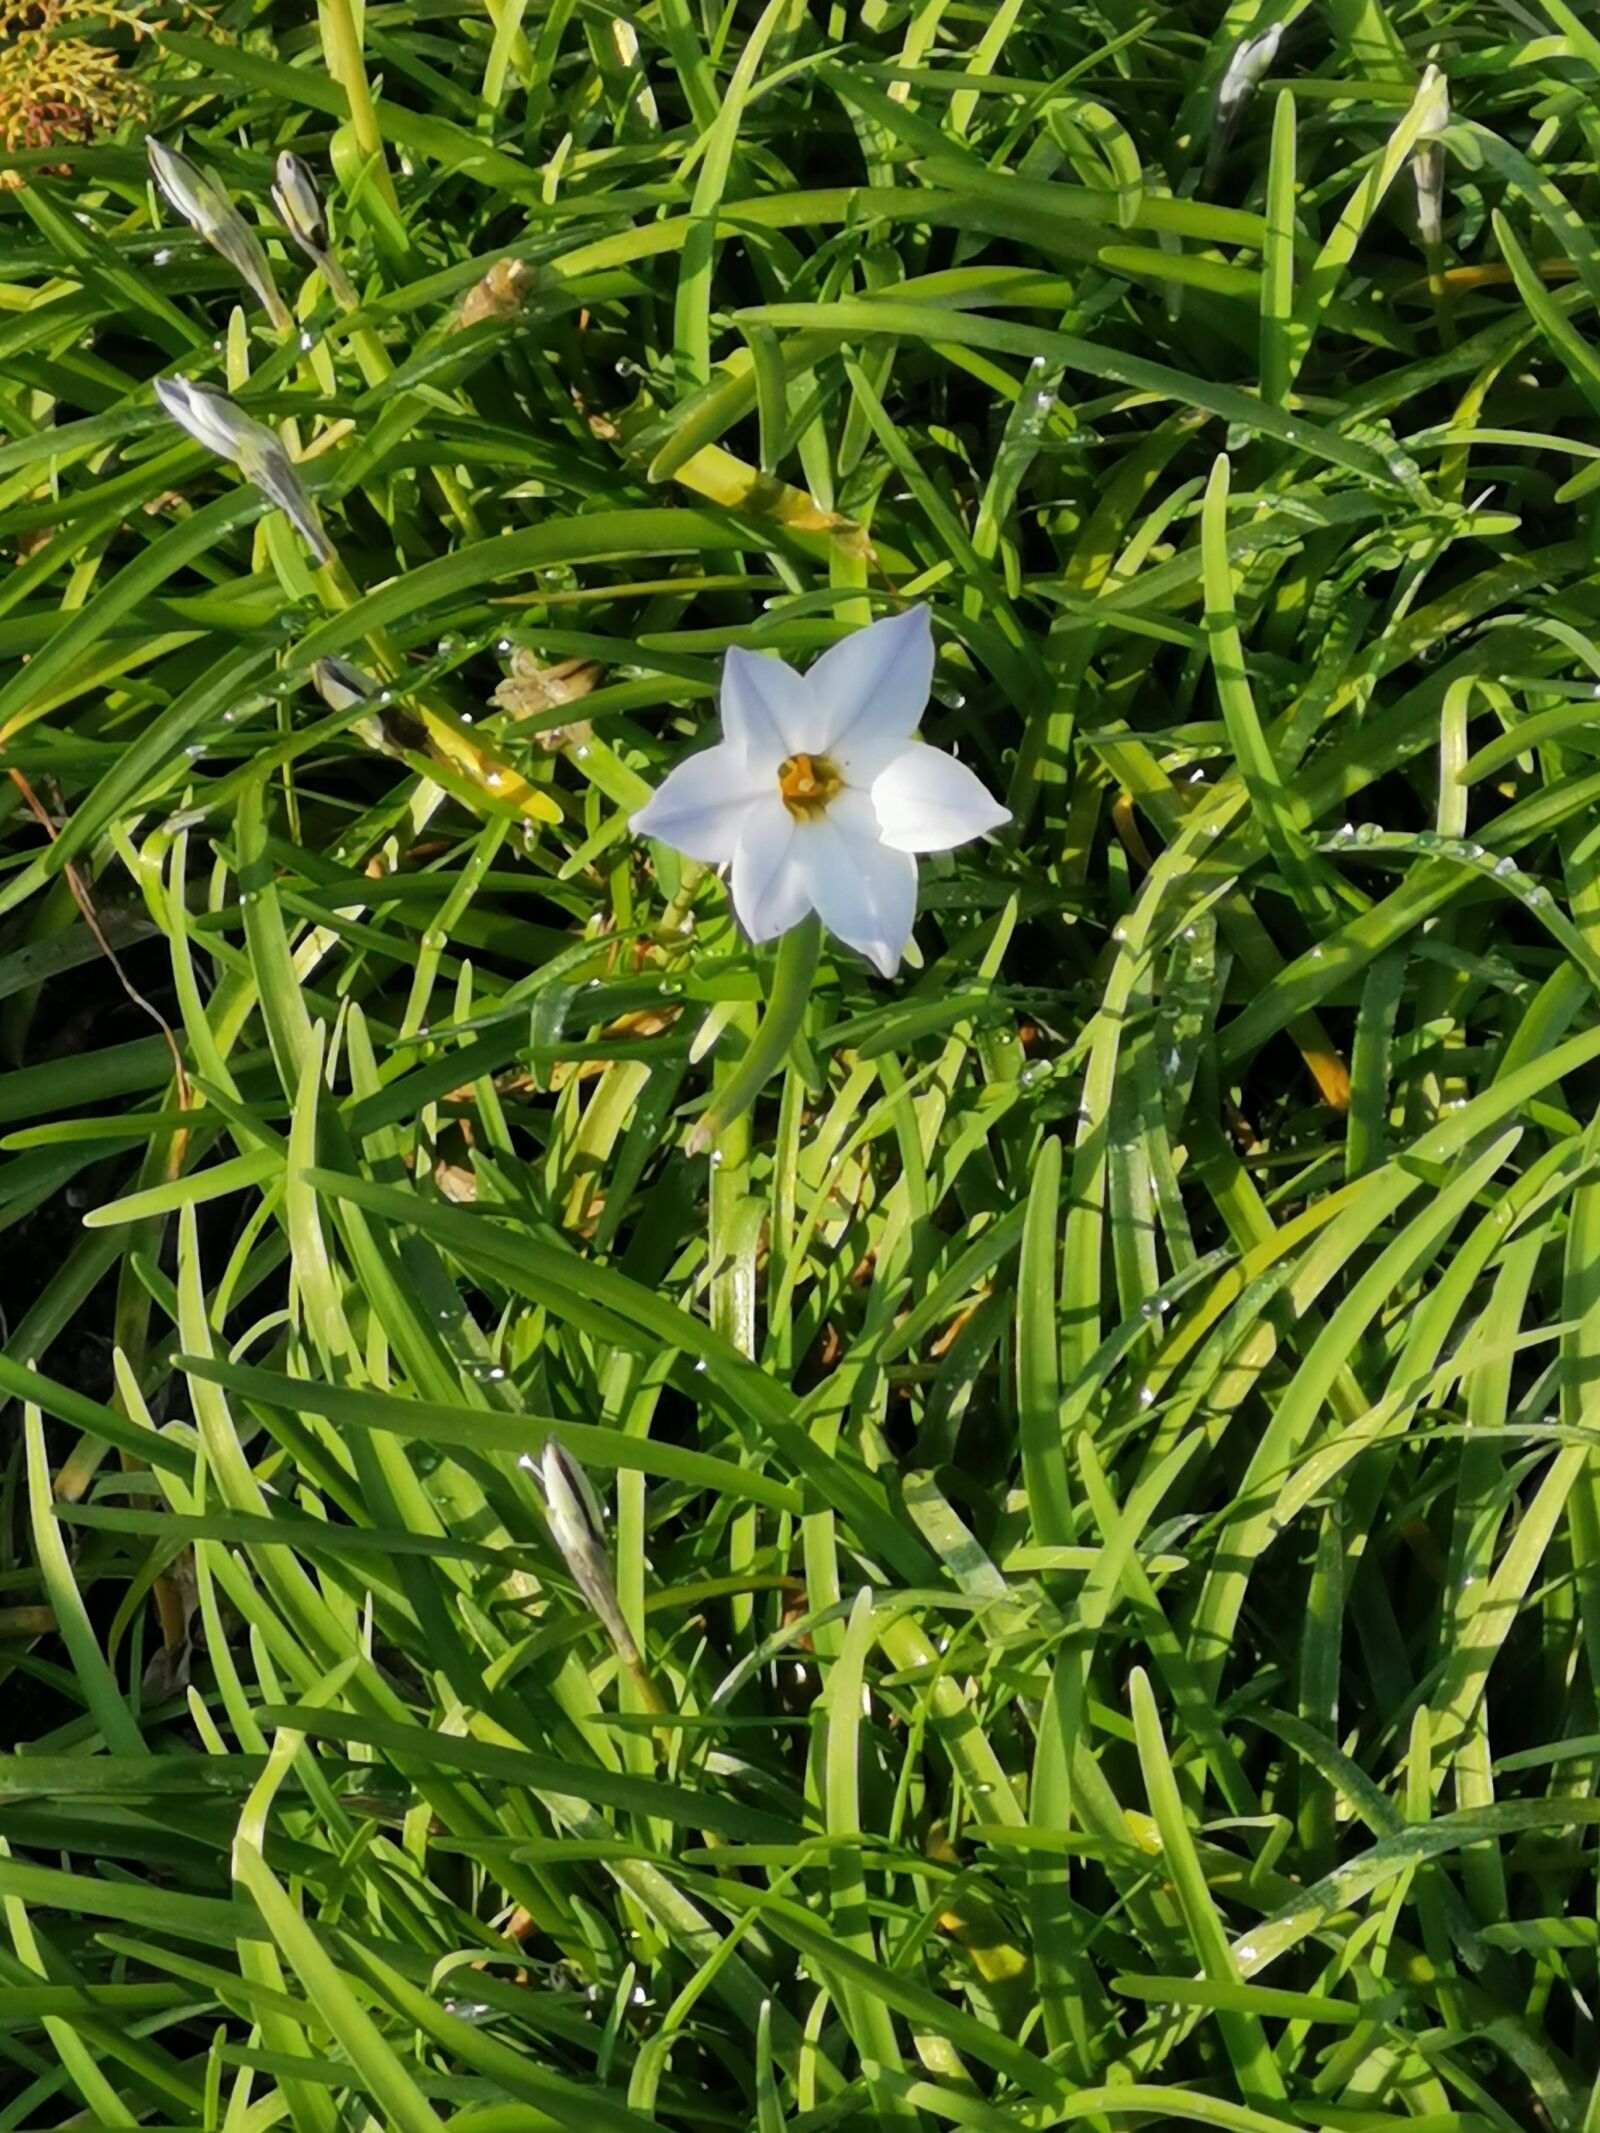 HUAWEI P30 sample photo. Flower, white, green photography